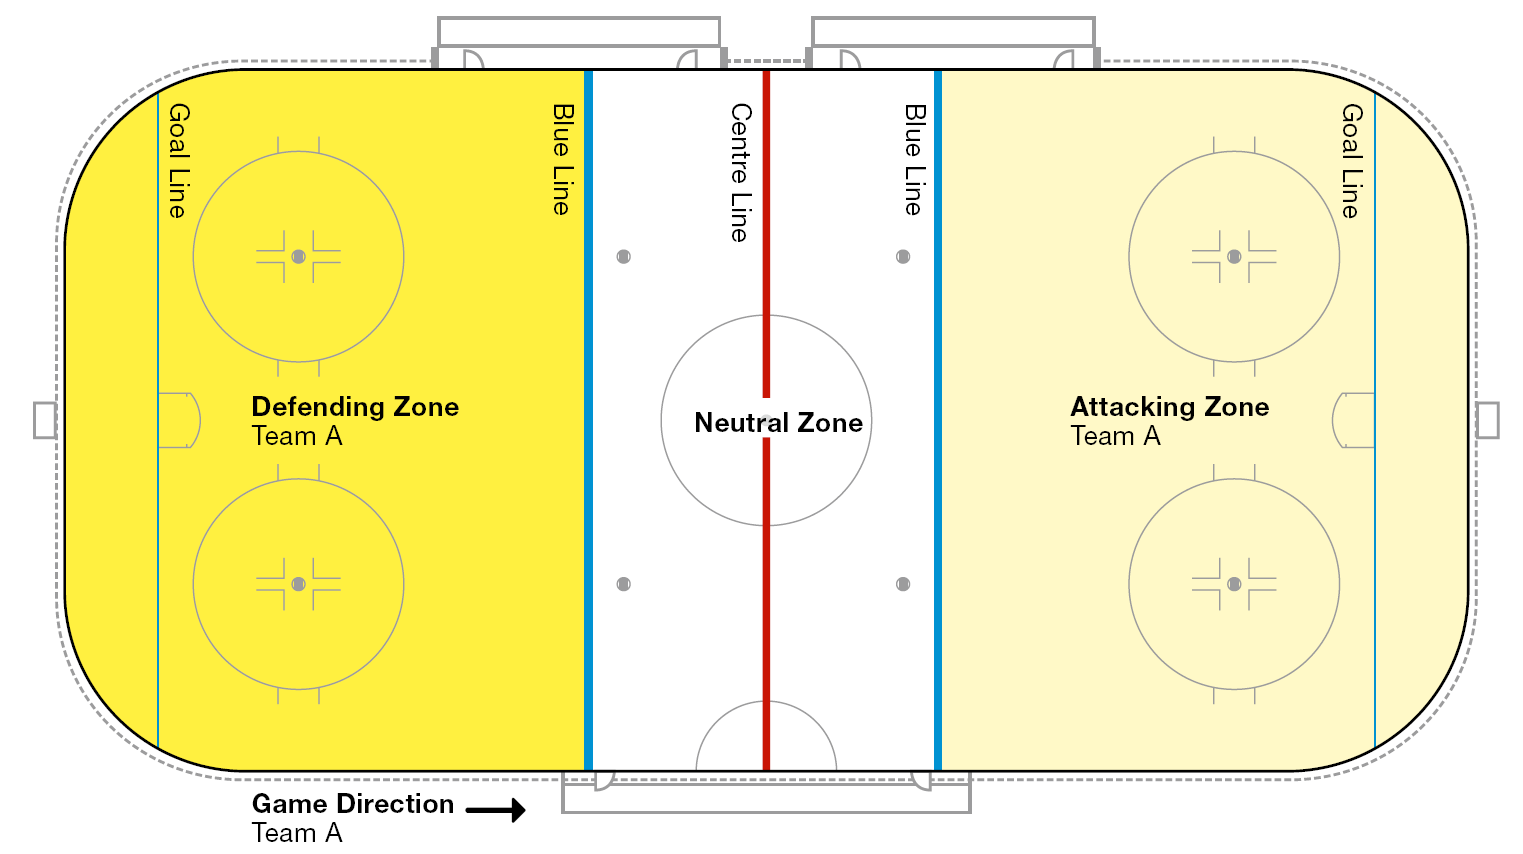 Ice surface markings / zones